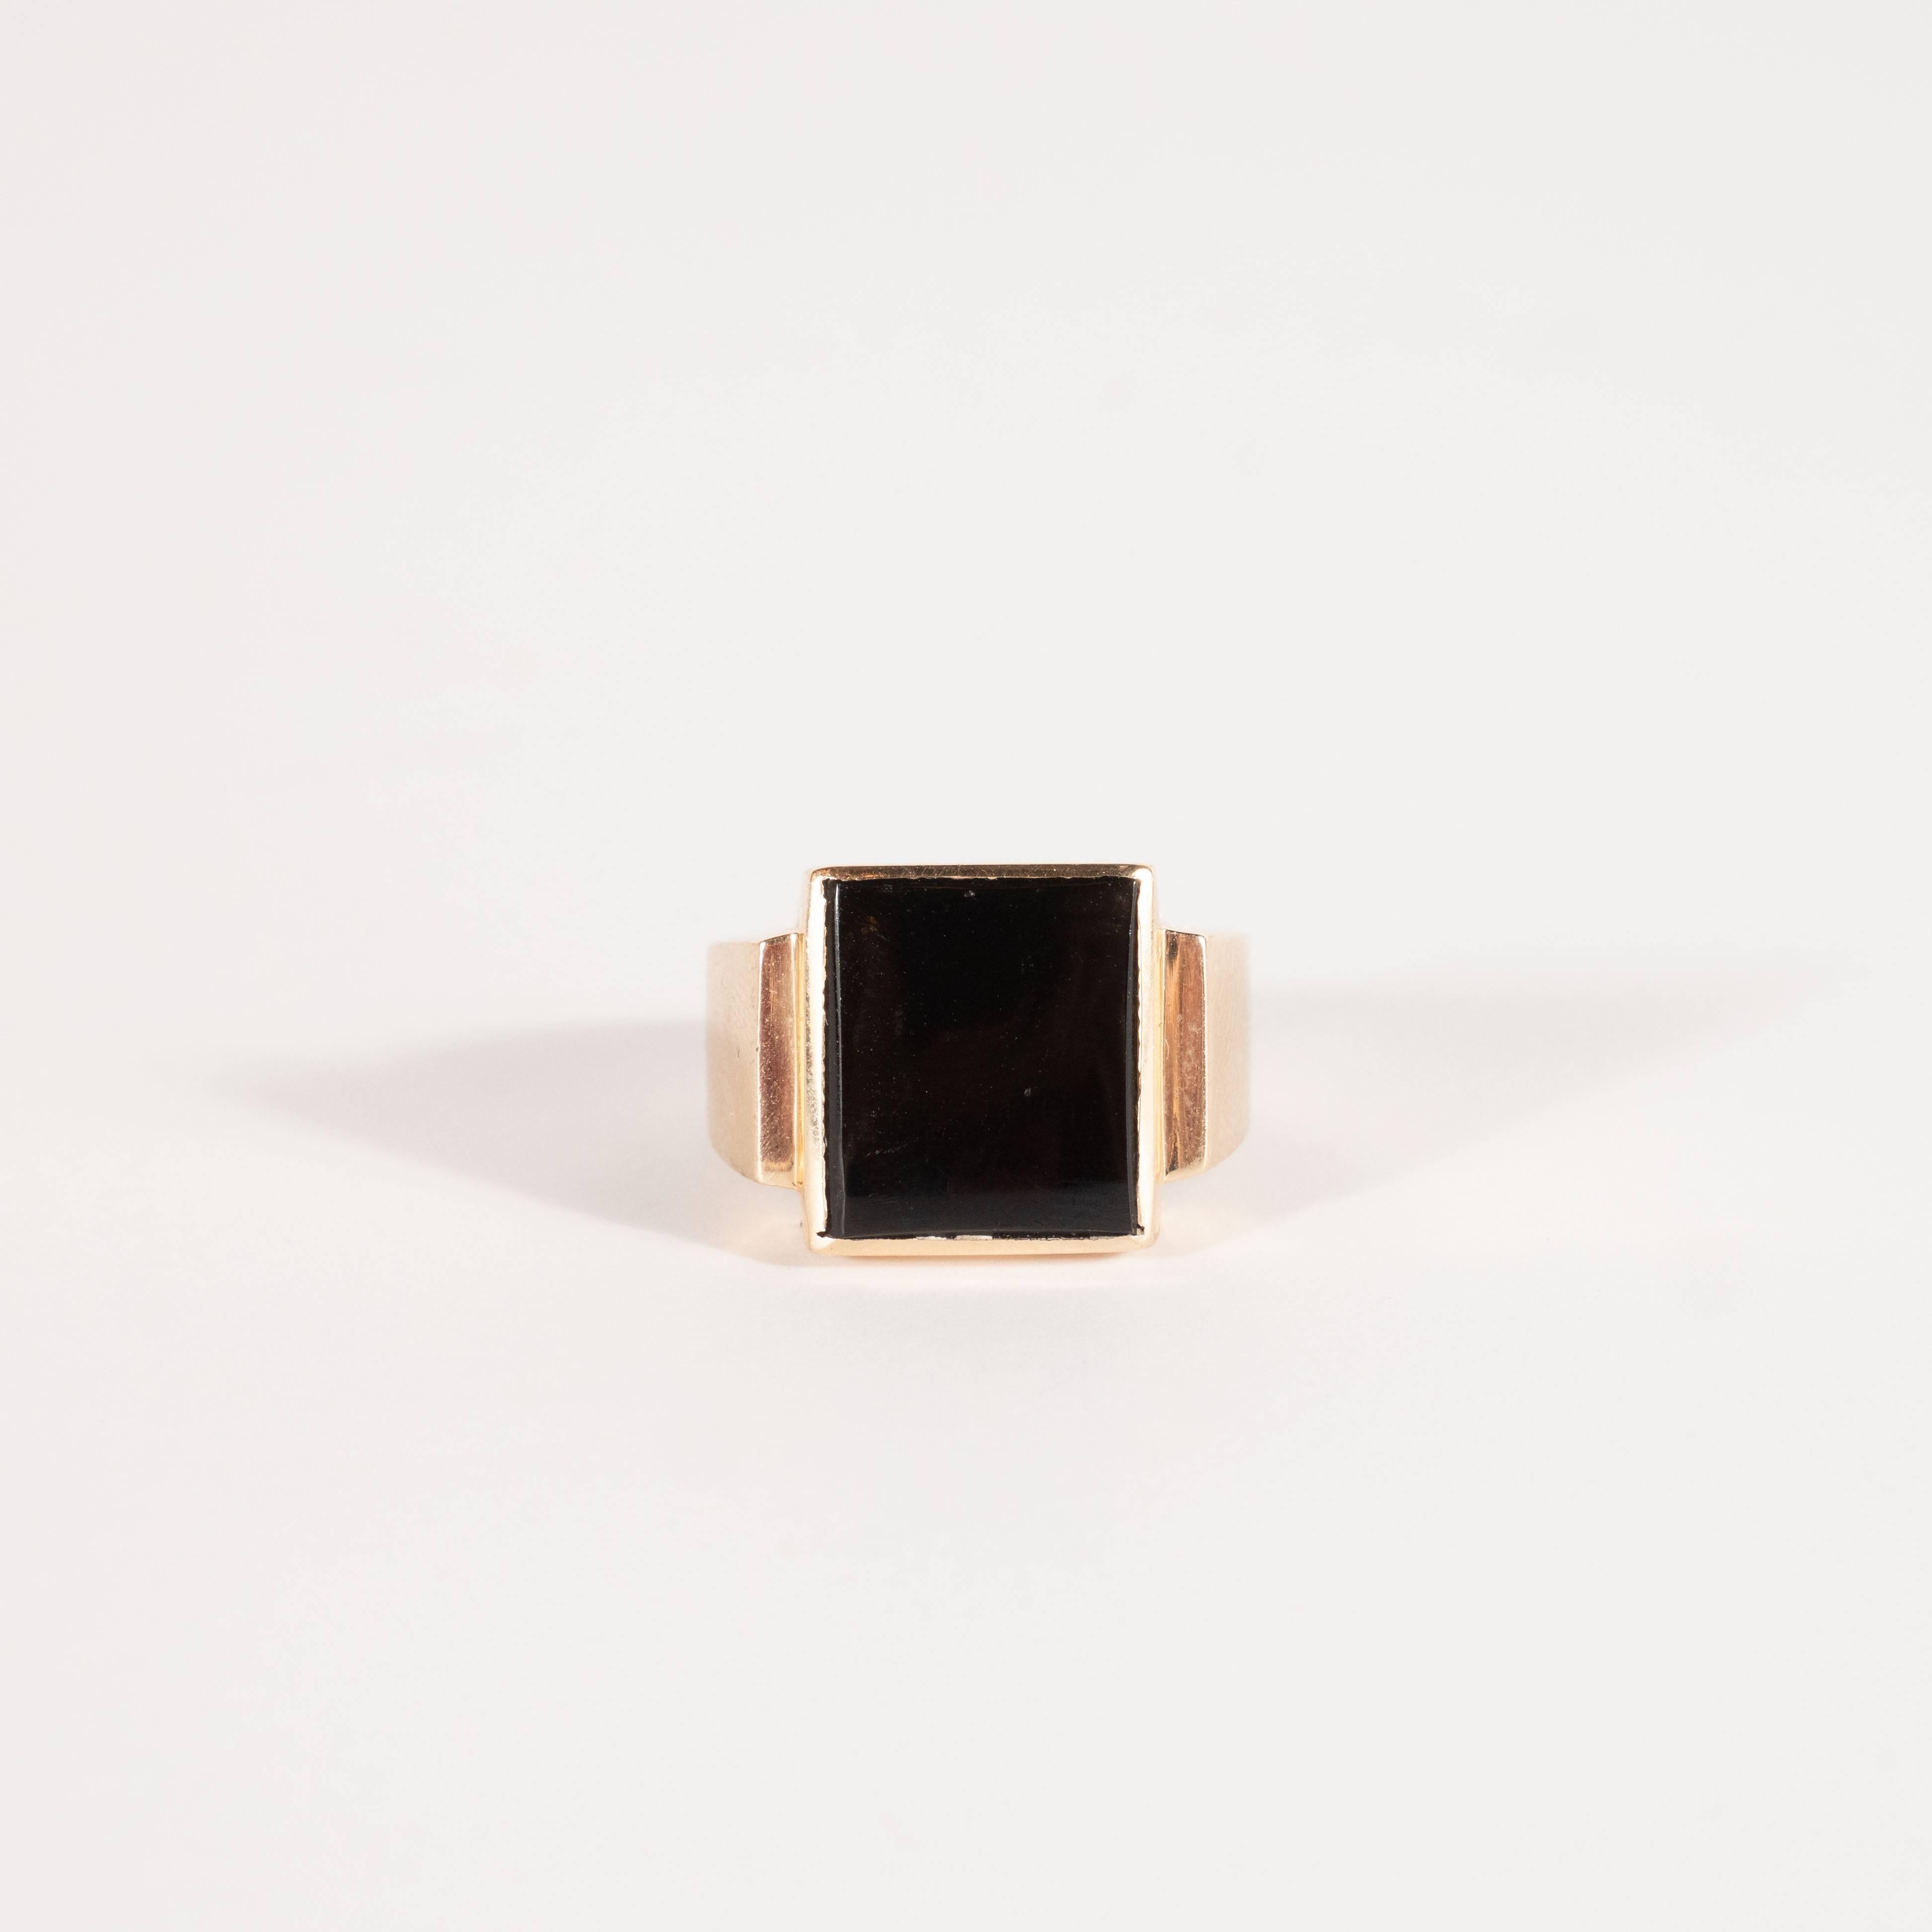 This handsome and refined ring was realized in the United States, circa 1940. It features a rectangular black onyx insert with skyscraper style sides consisting of two tiers of 14kt yellow gold, the bottom of which descends into the tapered band.